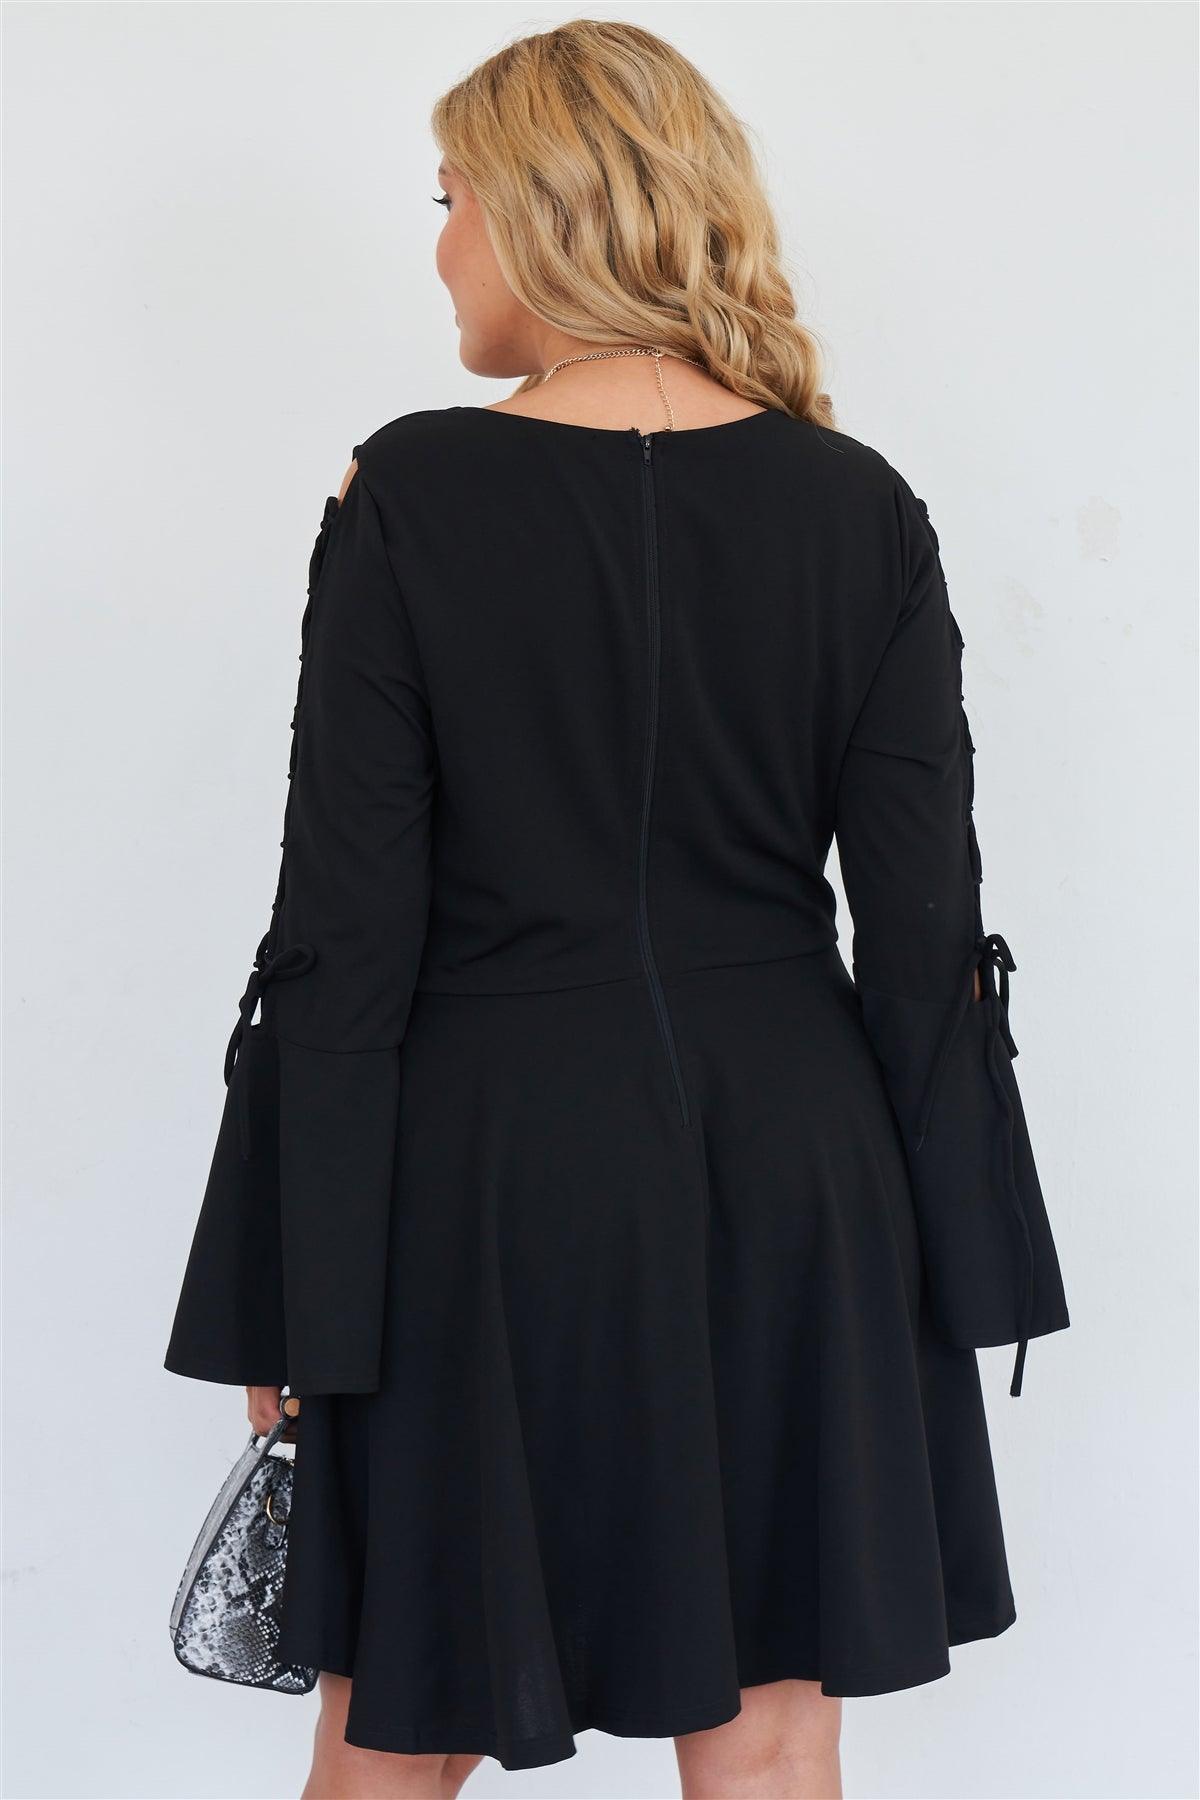 Junior Plus Size Black Lace Up Detail Bell Sleeve Dress /2-2-2-1